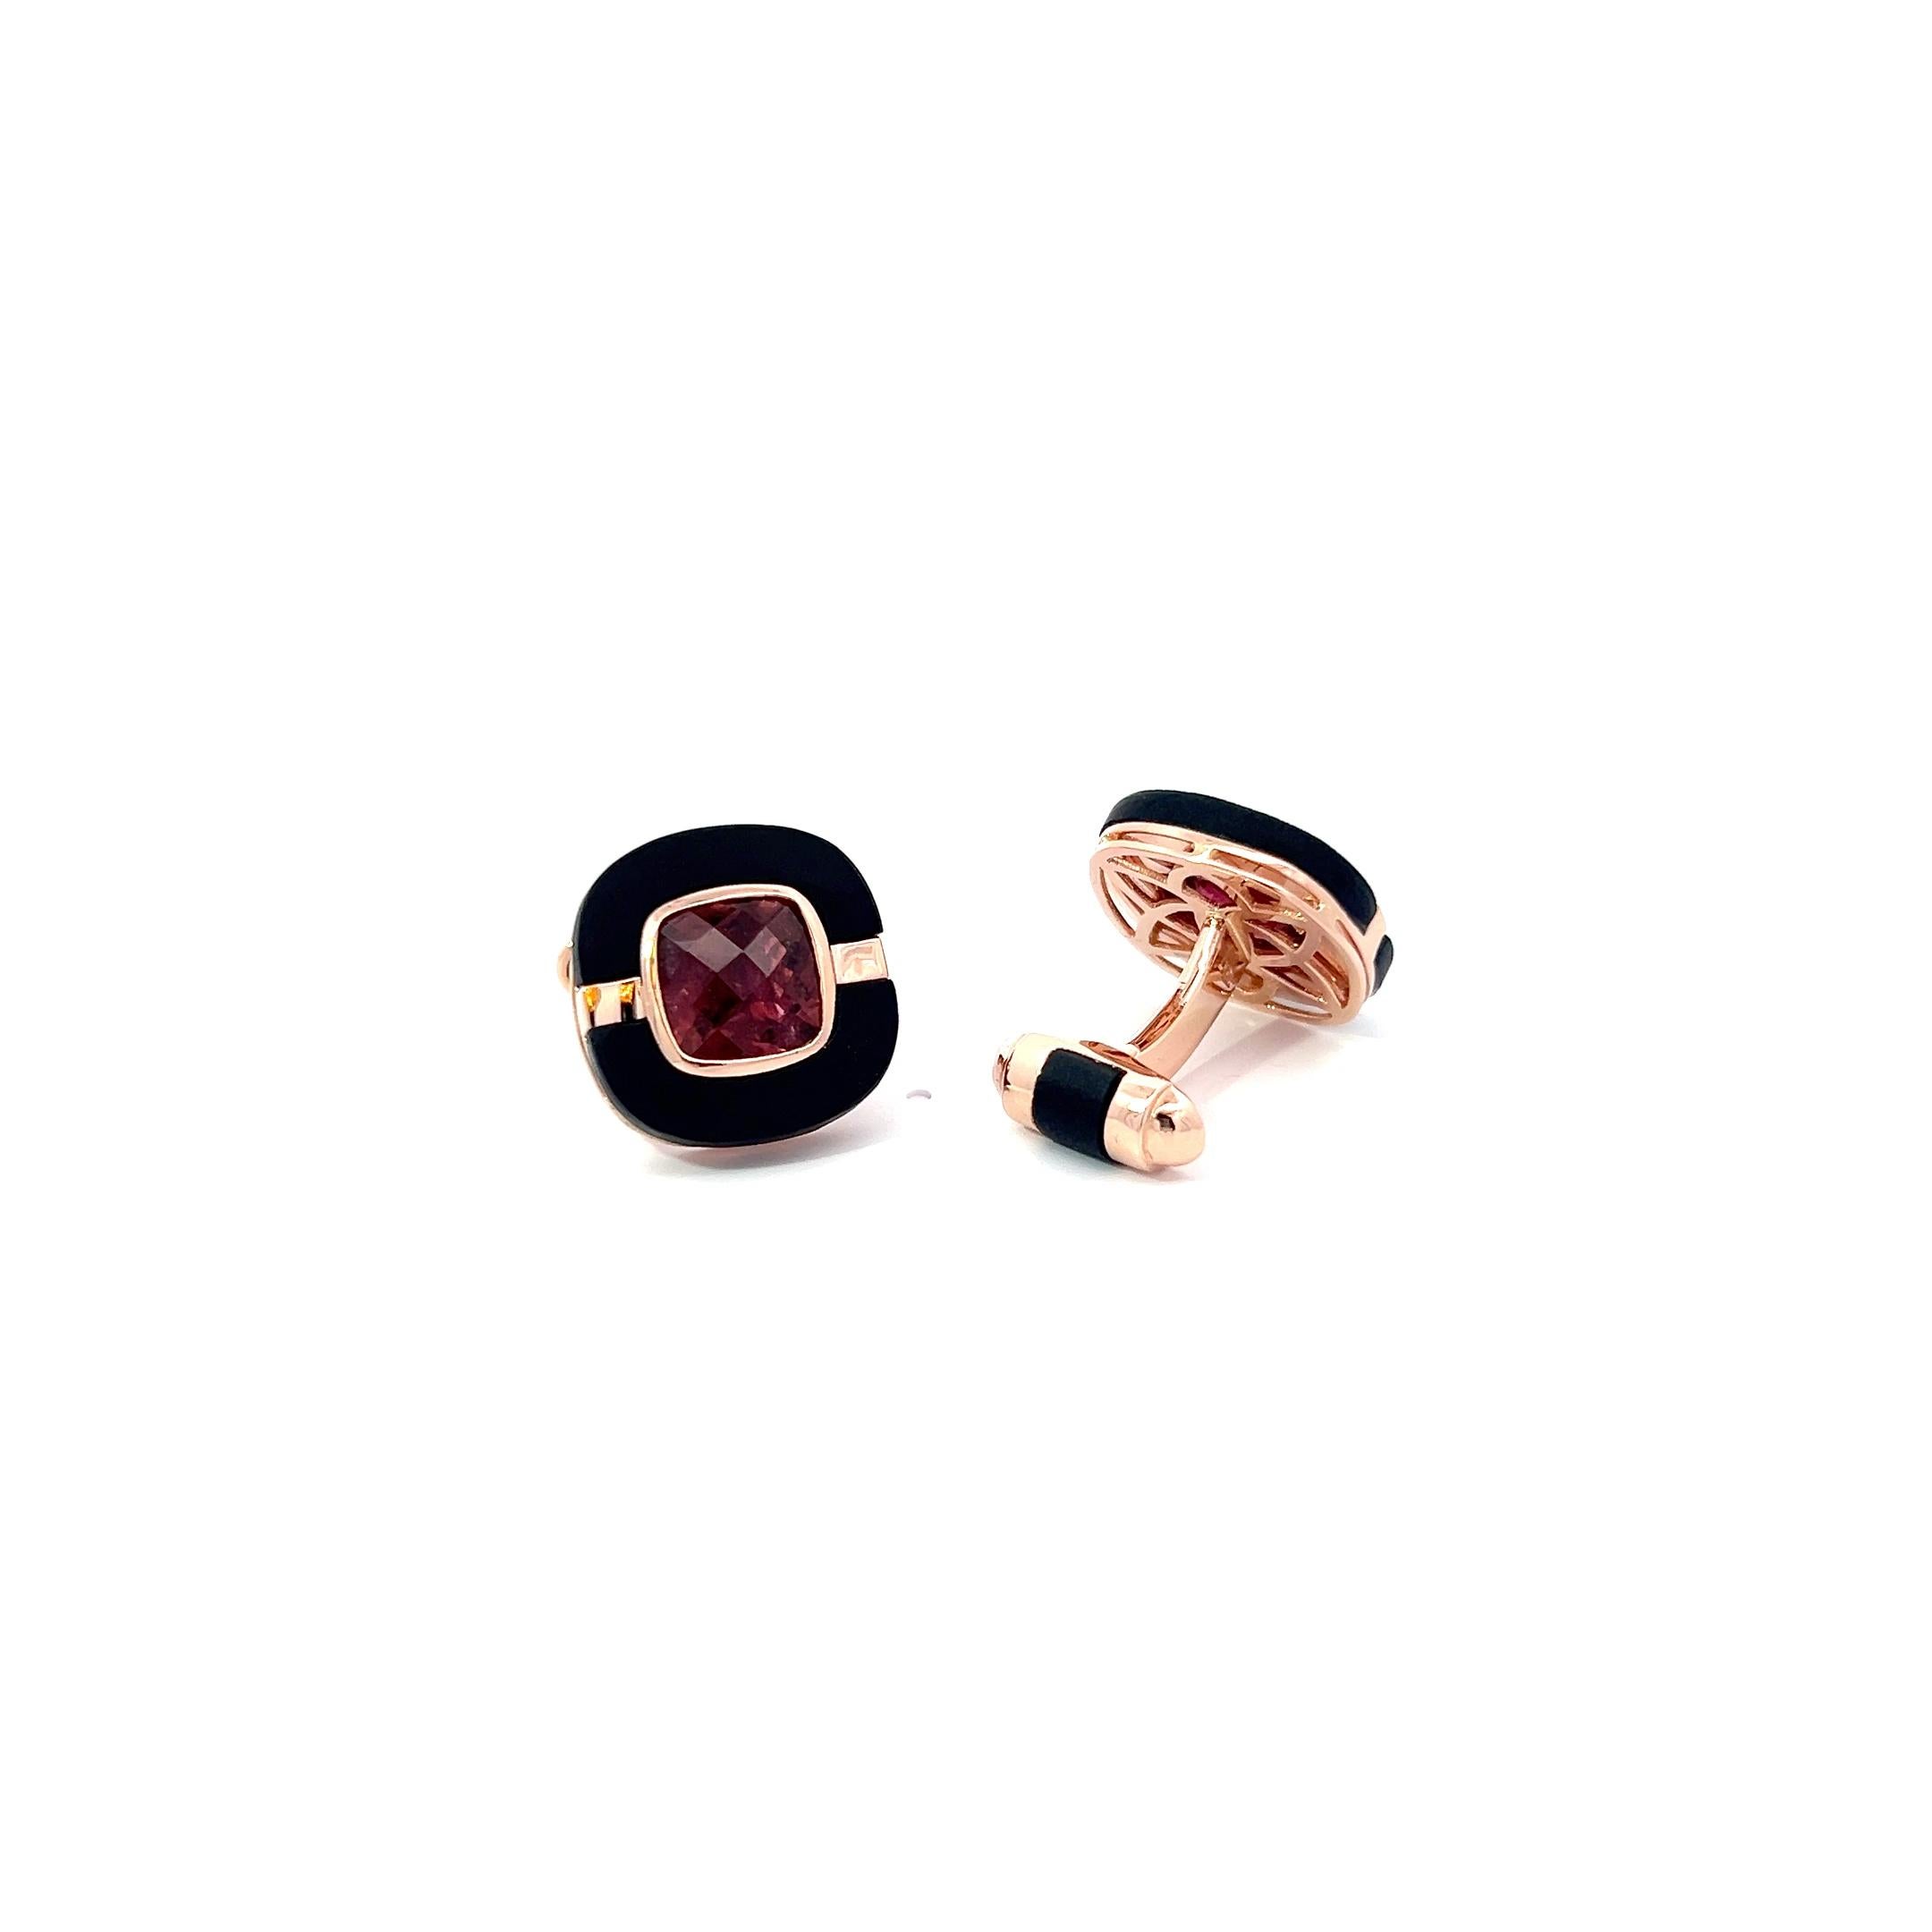 Women's or Men's 18k Rose Gold Cufflinks with Rubylite and Hand-Cut Black Onyx For Sale